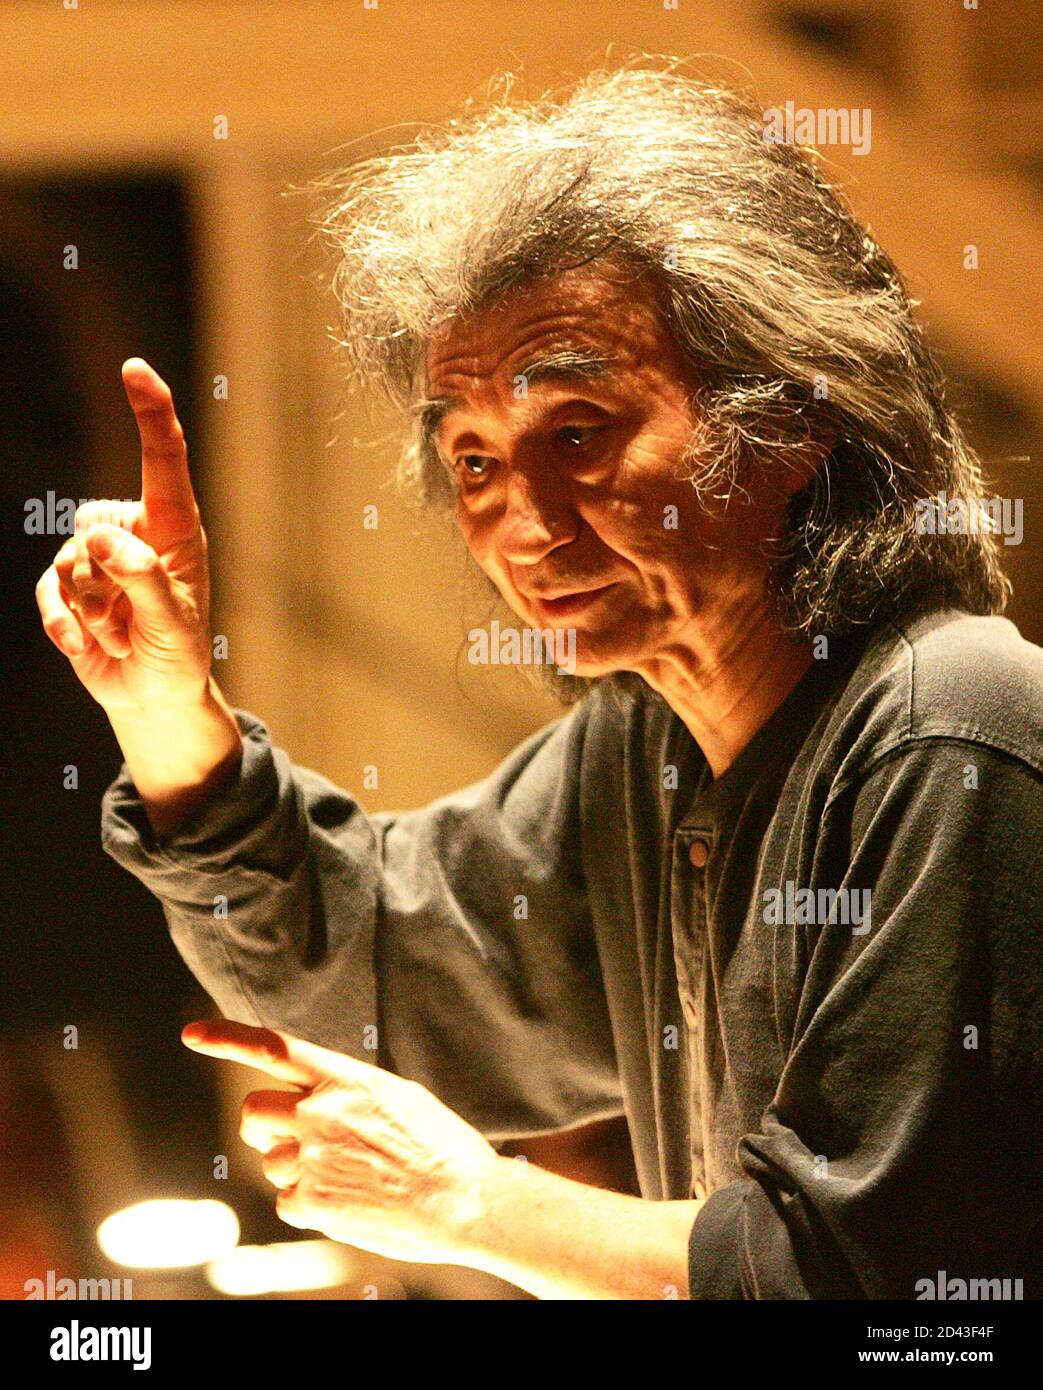 Maestro Seiji Ozawa of Japan conducts the Vienna State Opera Orchestra during a dress rehearsal of Giacomo Puccini's opera 'Manon Lescaut' in Vienna May 30, 2005. The opera is directed by Robert Carsen of Canada and will have its premiere on June 4. REUTERS/Herwig Prammer REUTERS   PR/ Stock Photo